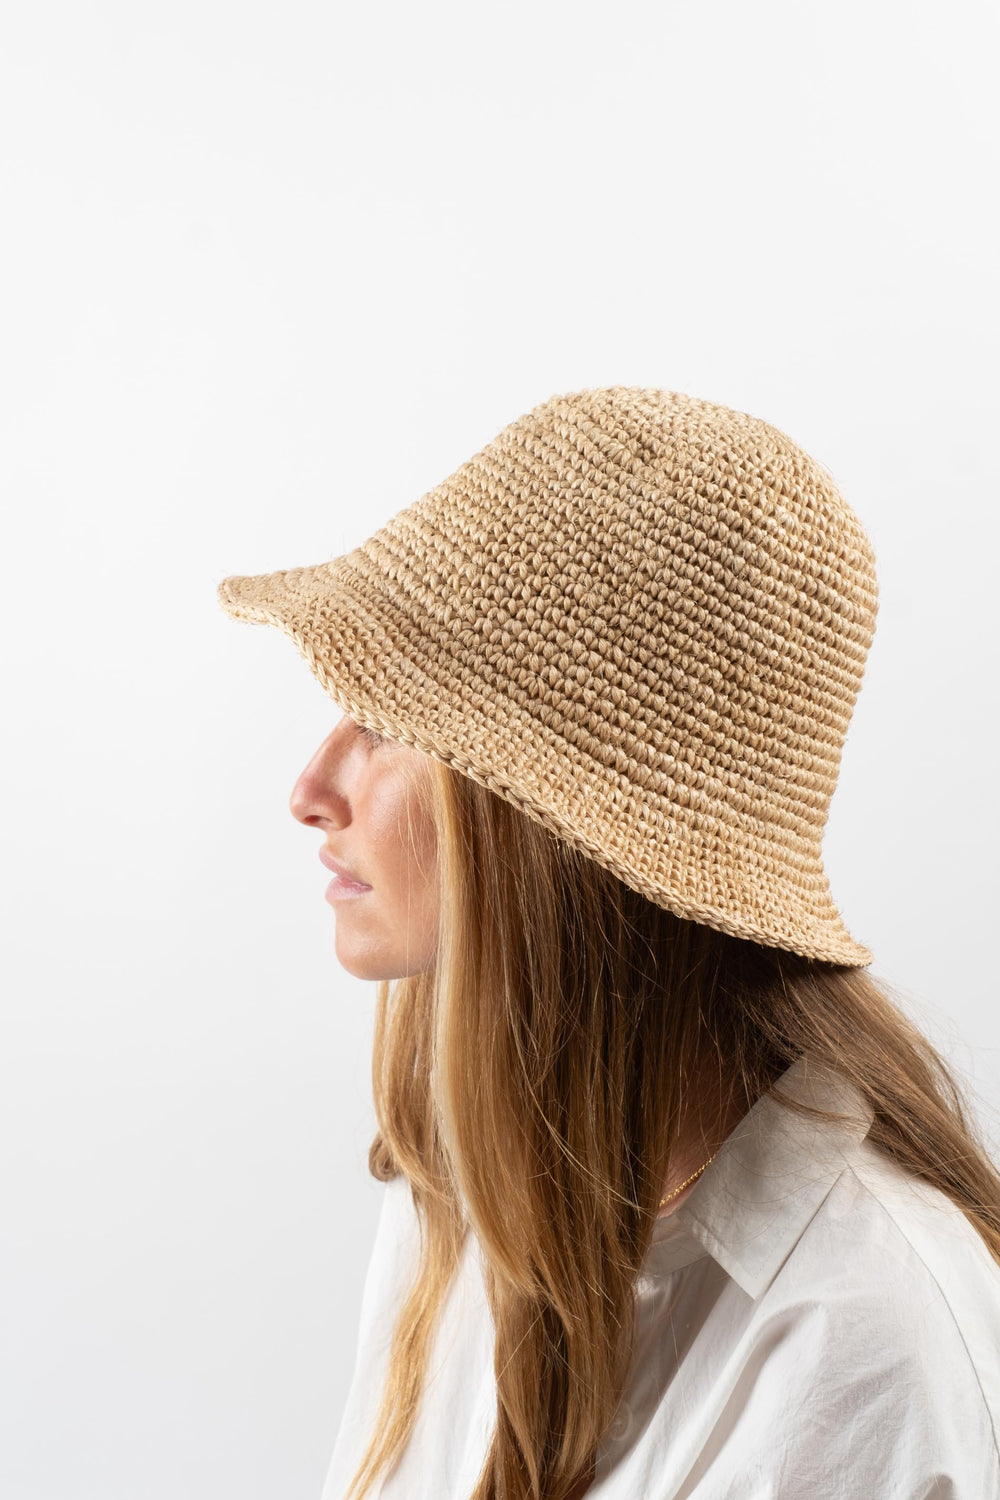 Crocheted Bucket Hat in Natural